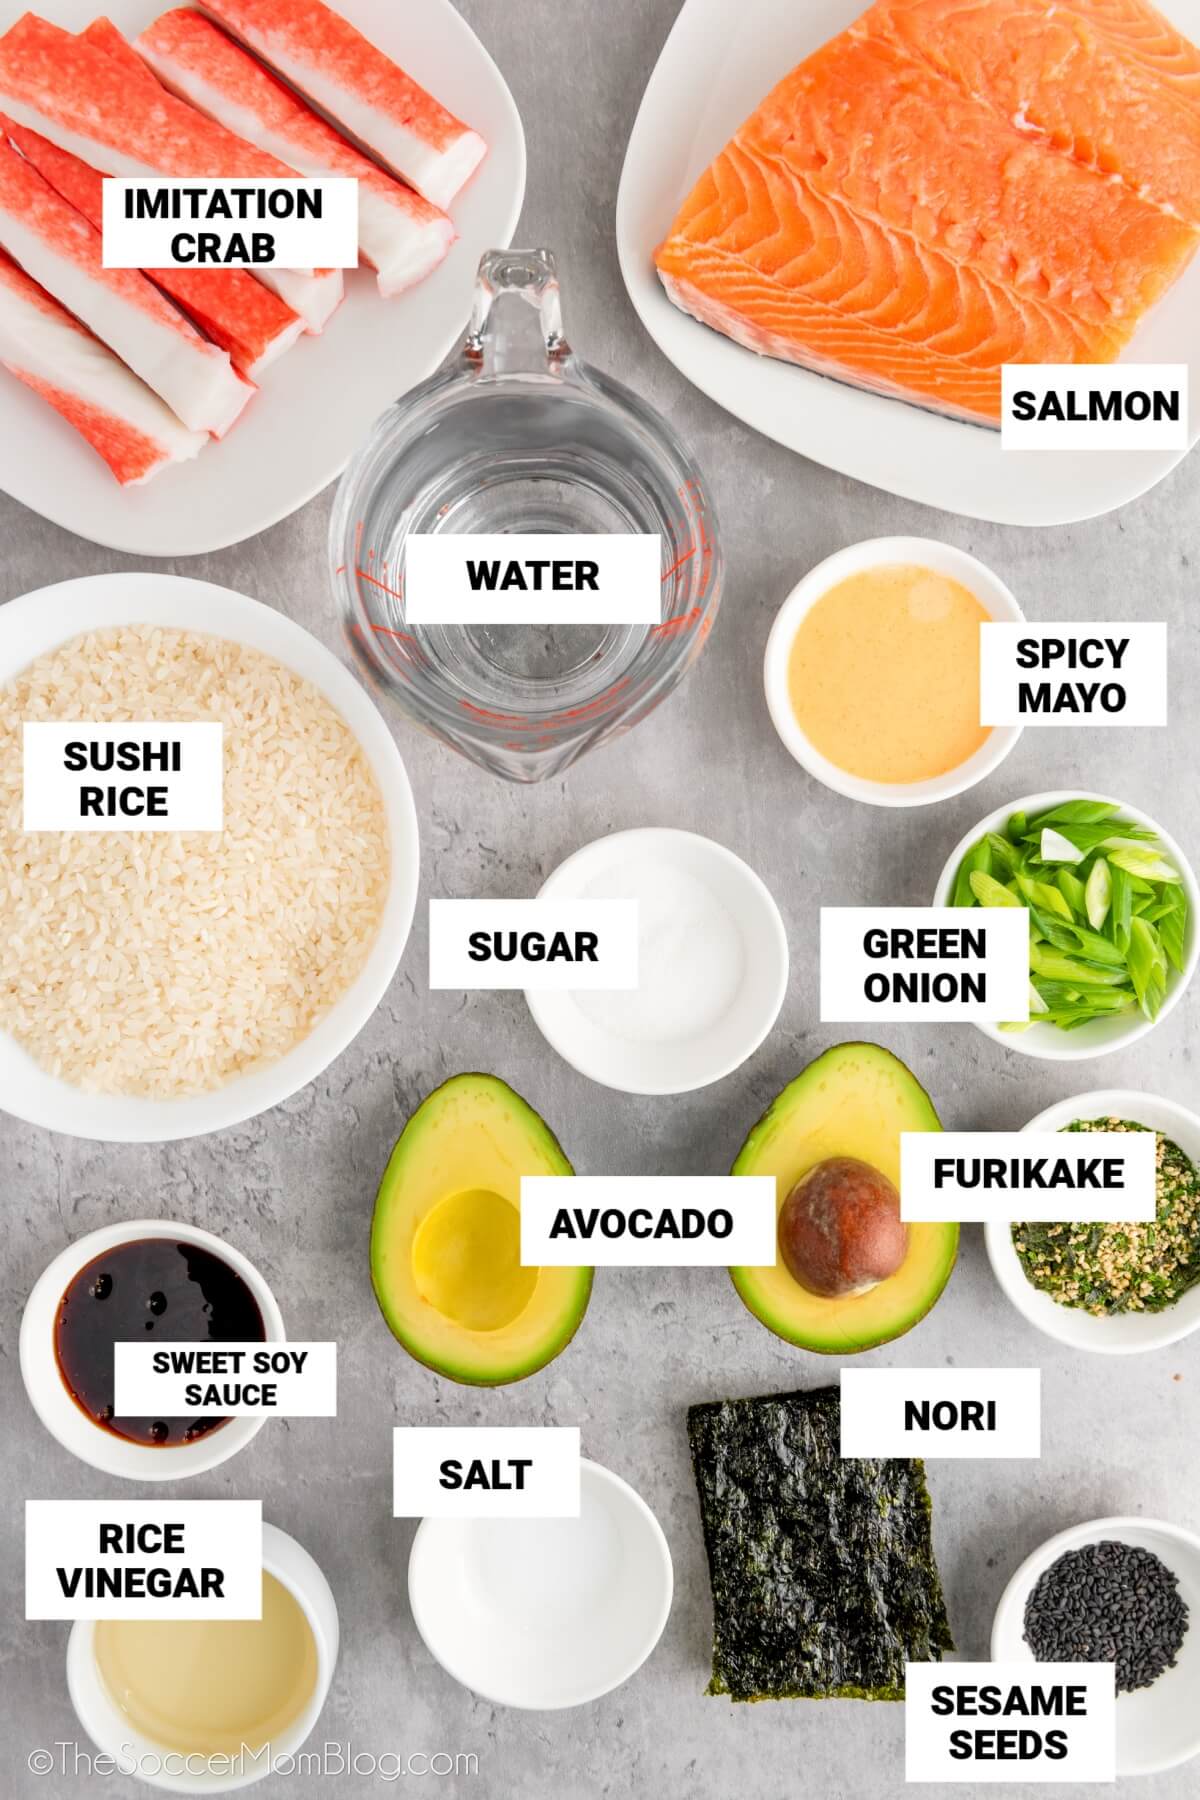 Salmon Sushi Bake Ingredients, with text labels